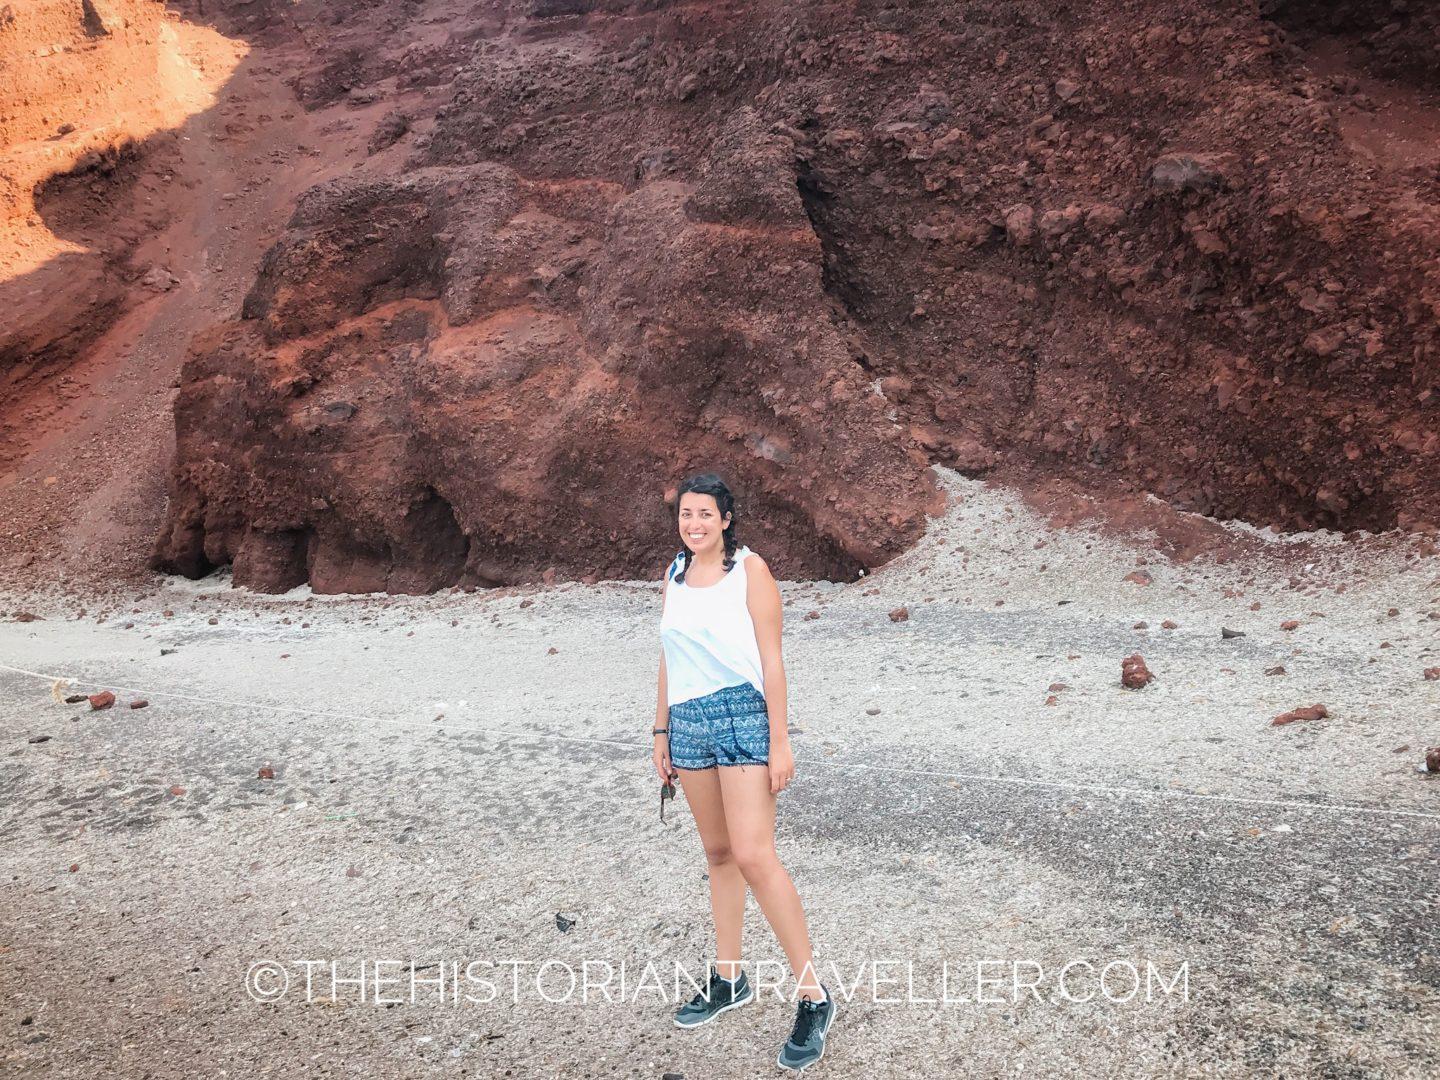 Me at the Red Beach at early morning